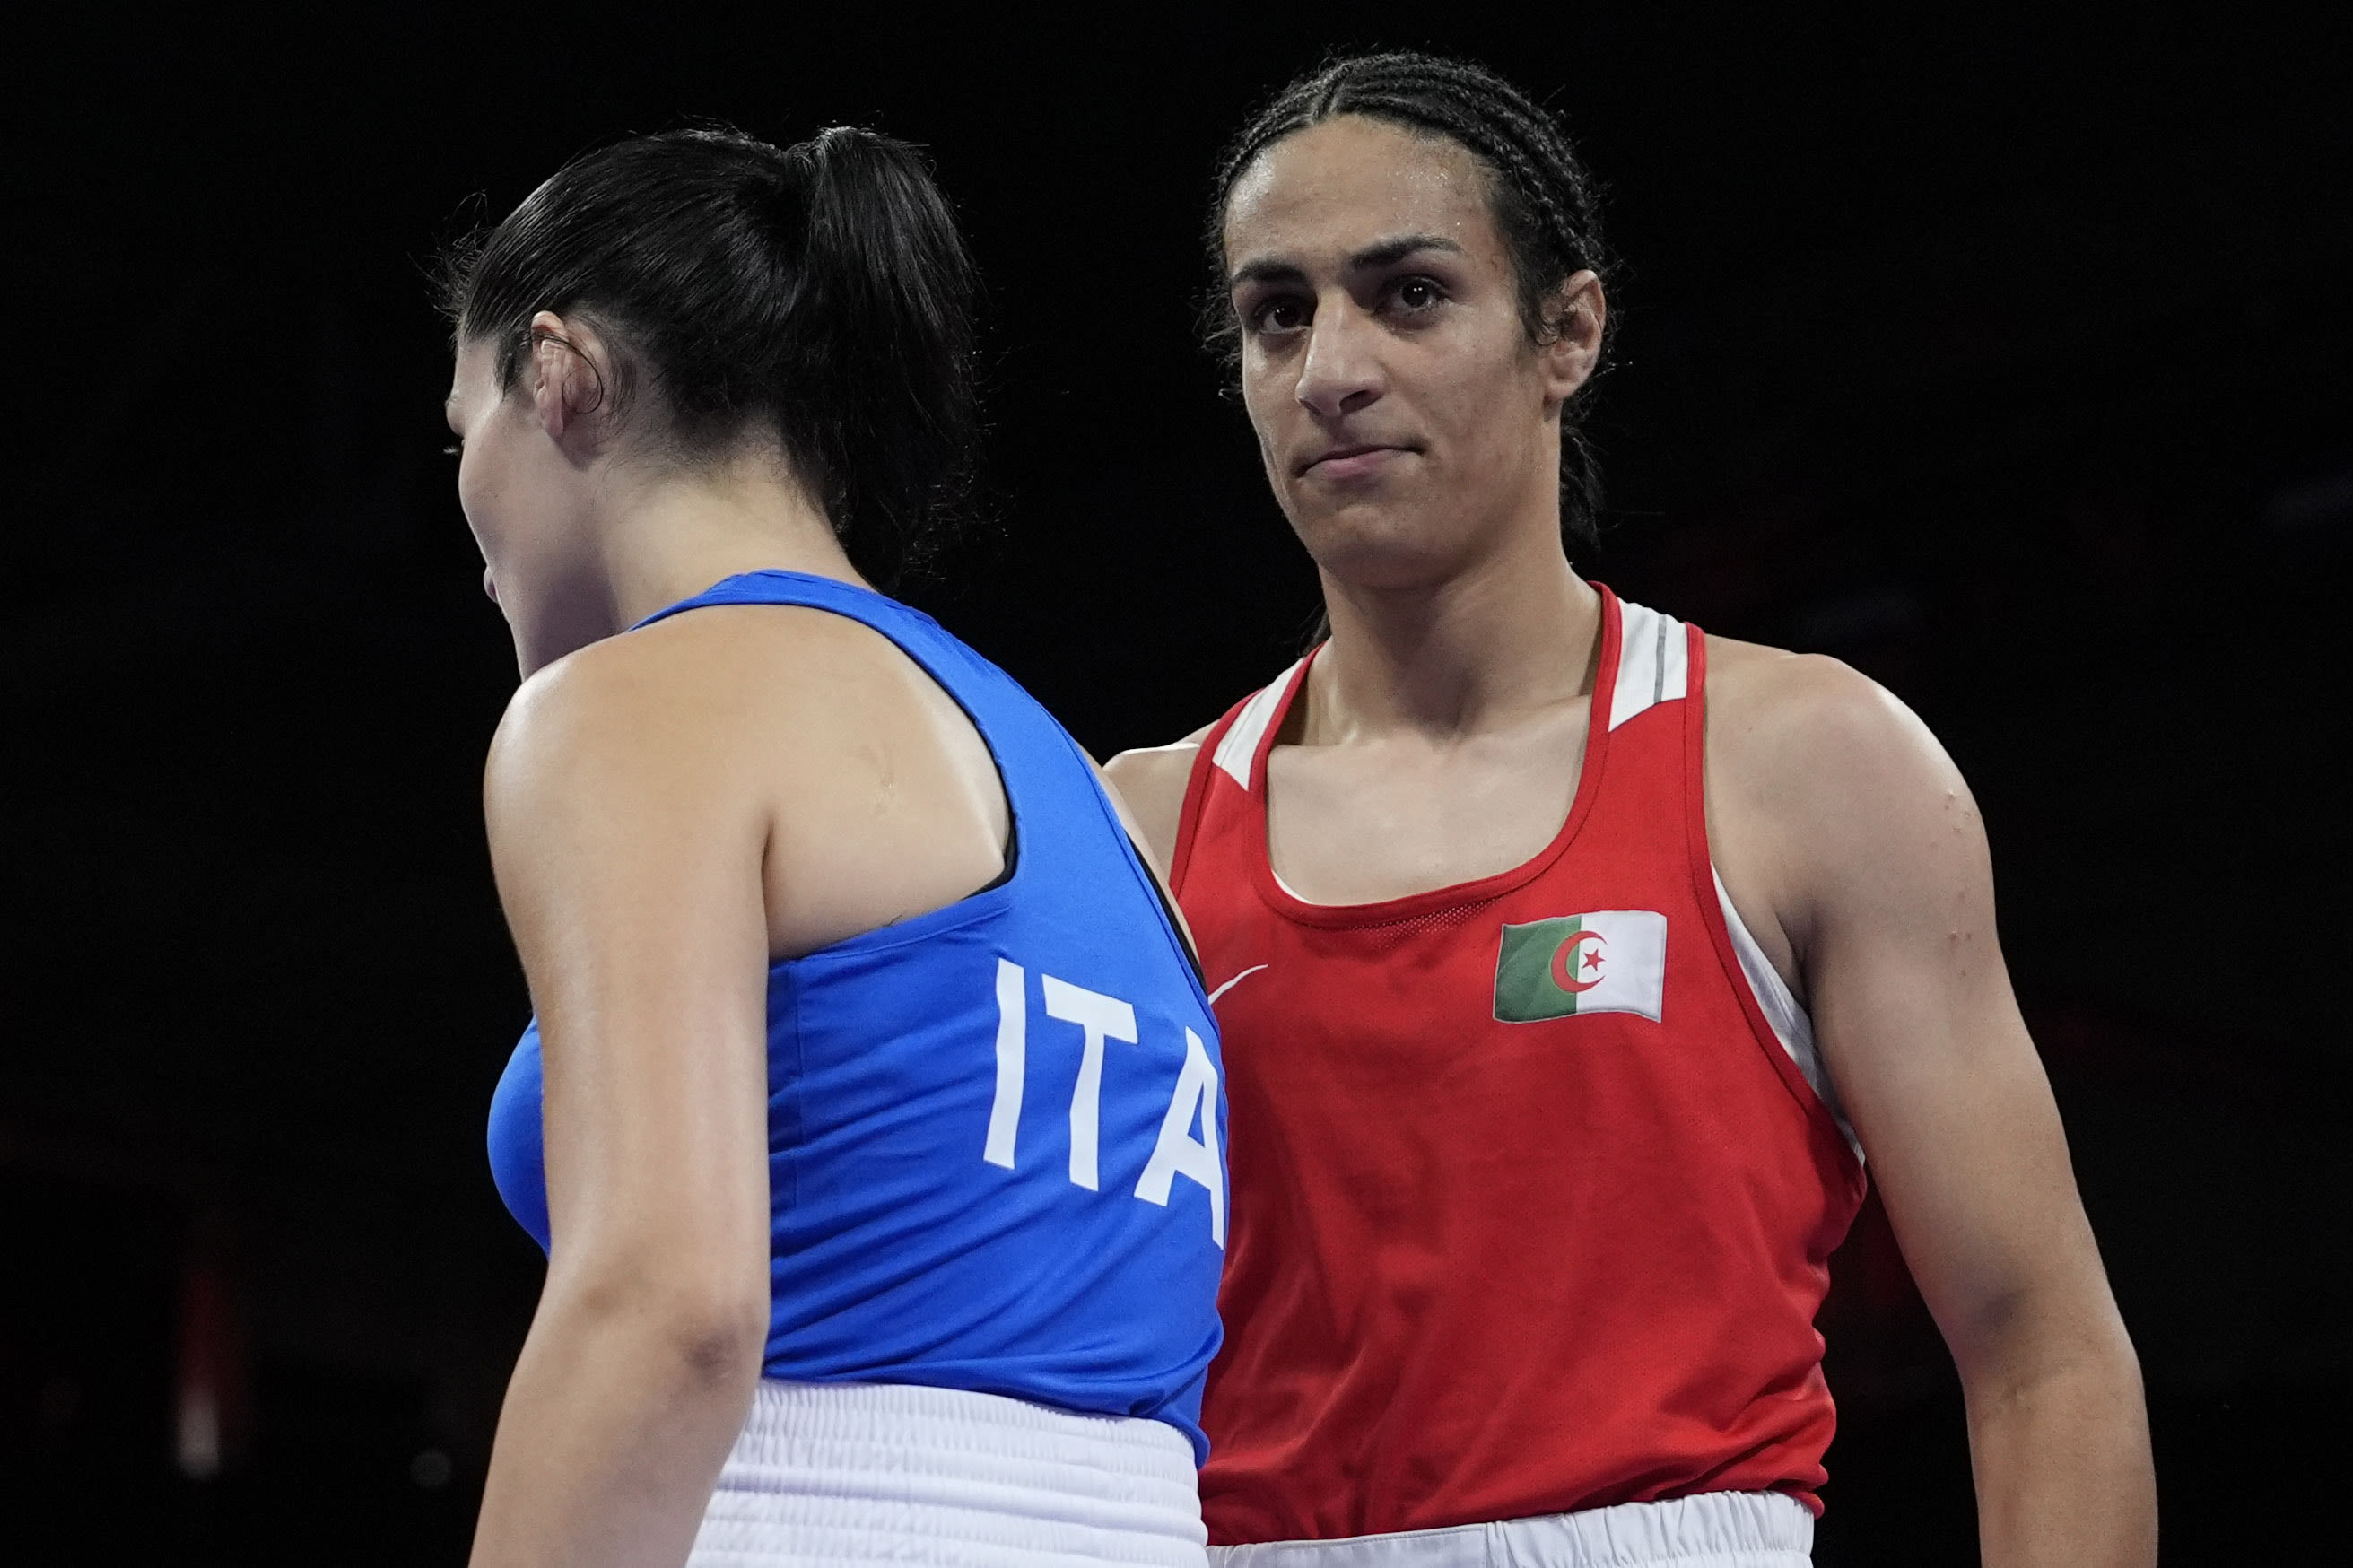 Olympic boxer Imane Khelif ‘gender controversy’ explained by health experts